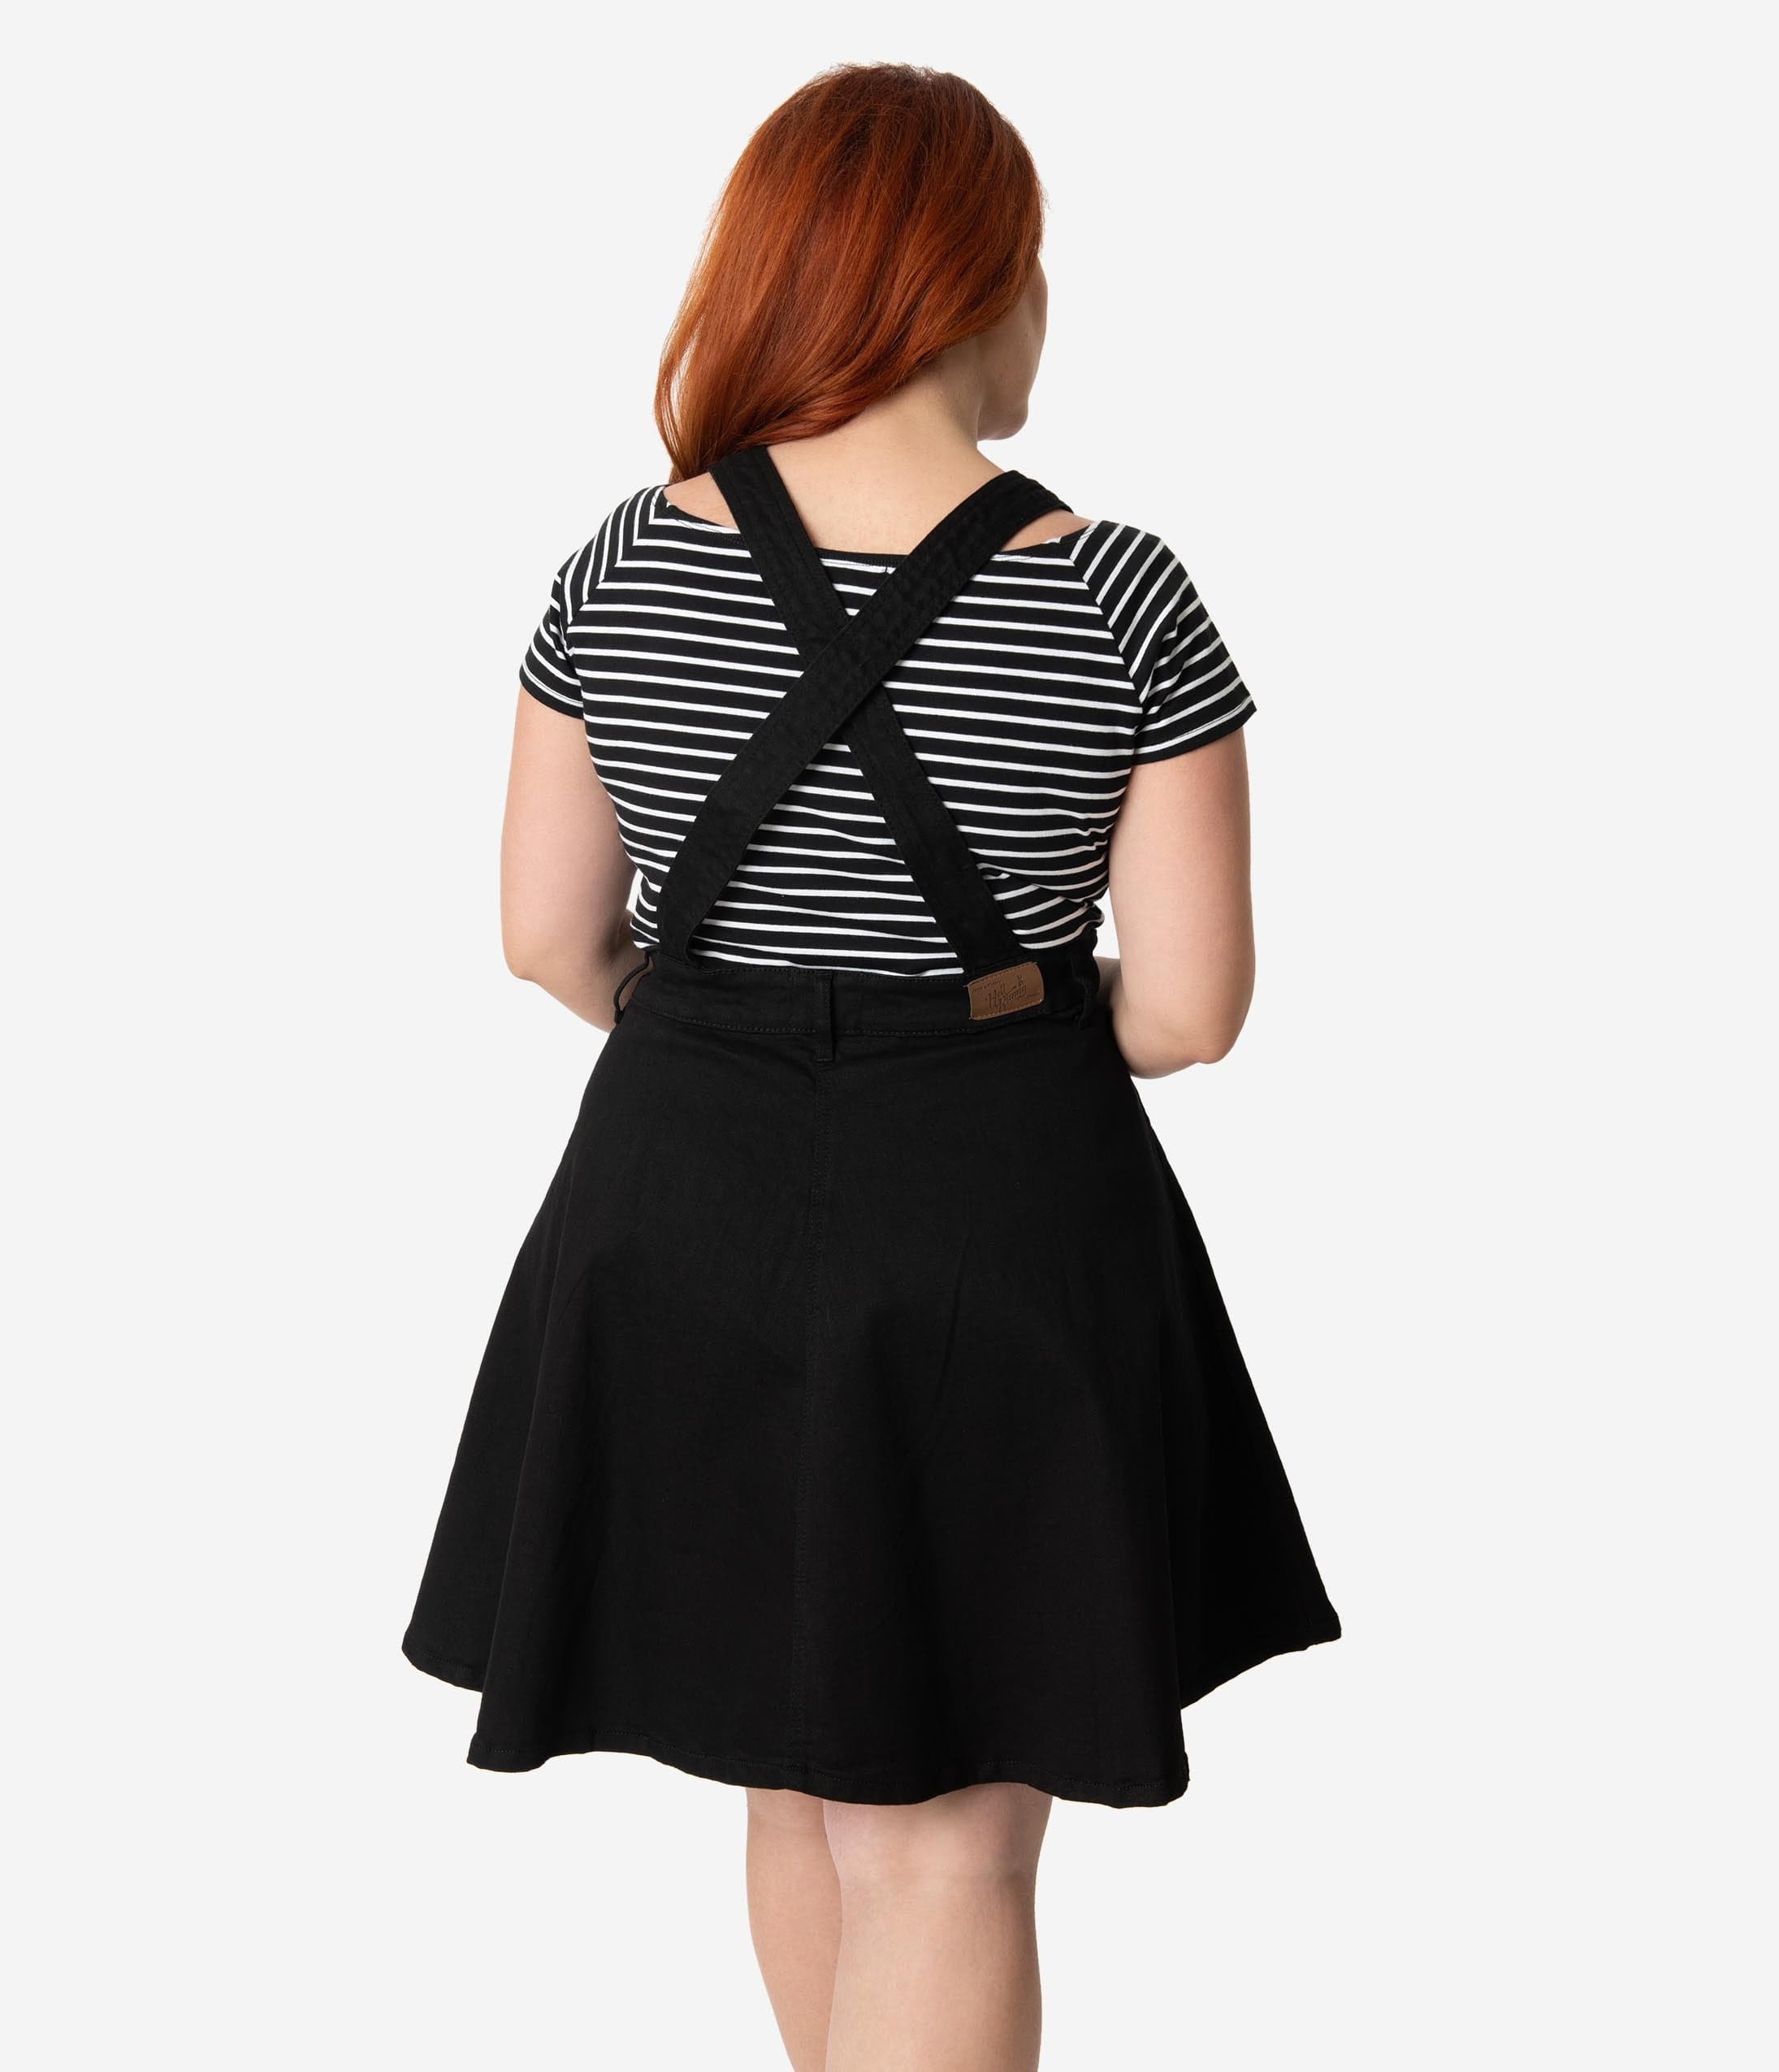 overall skirt dress plus size